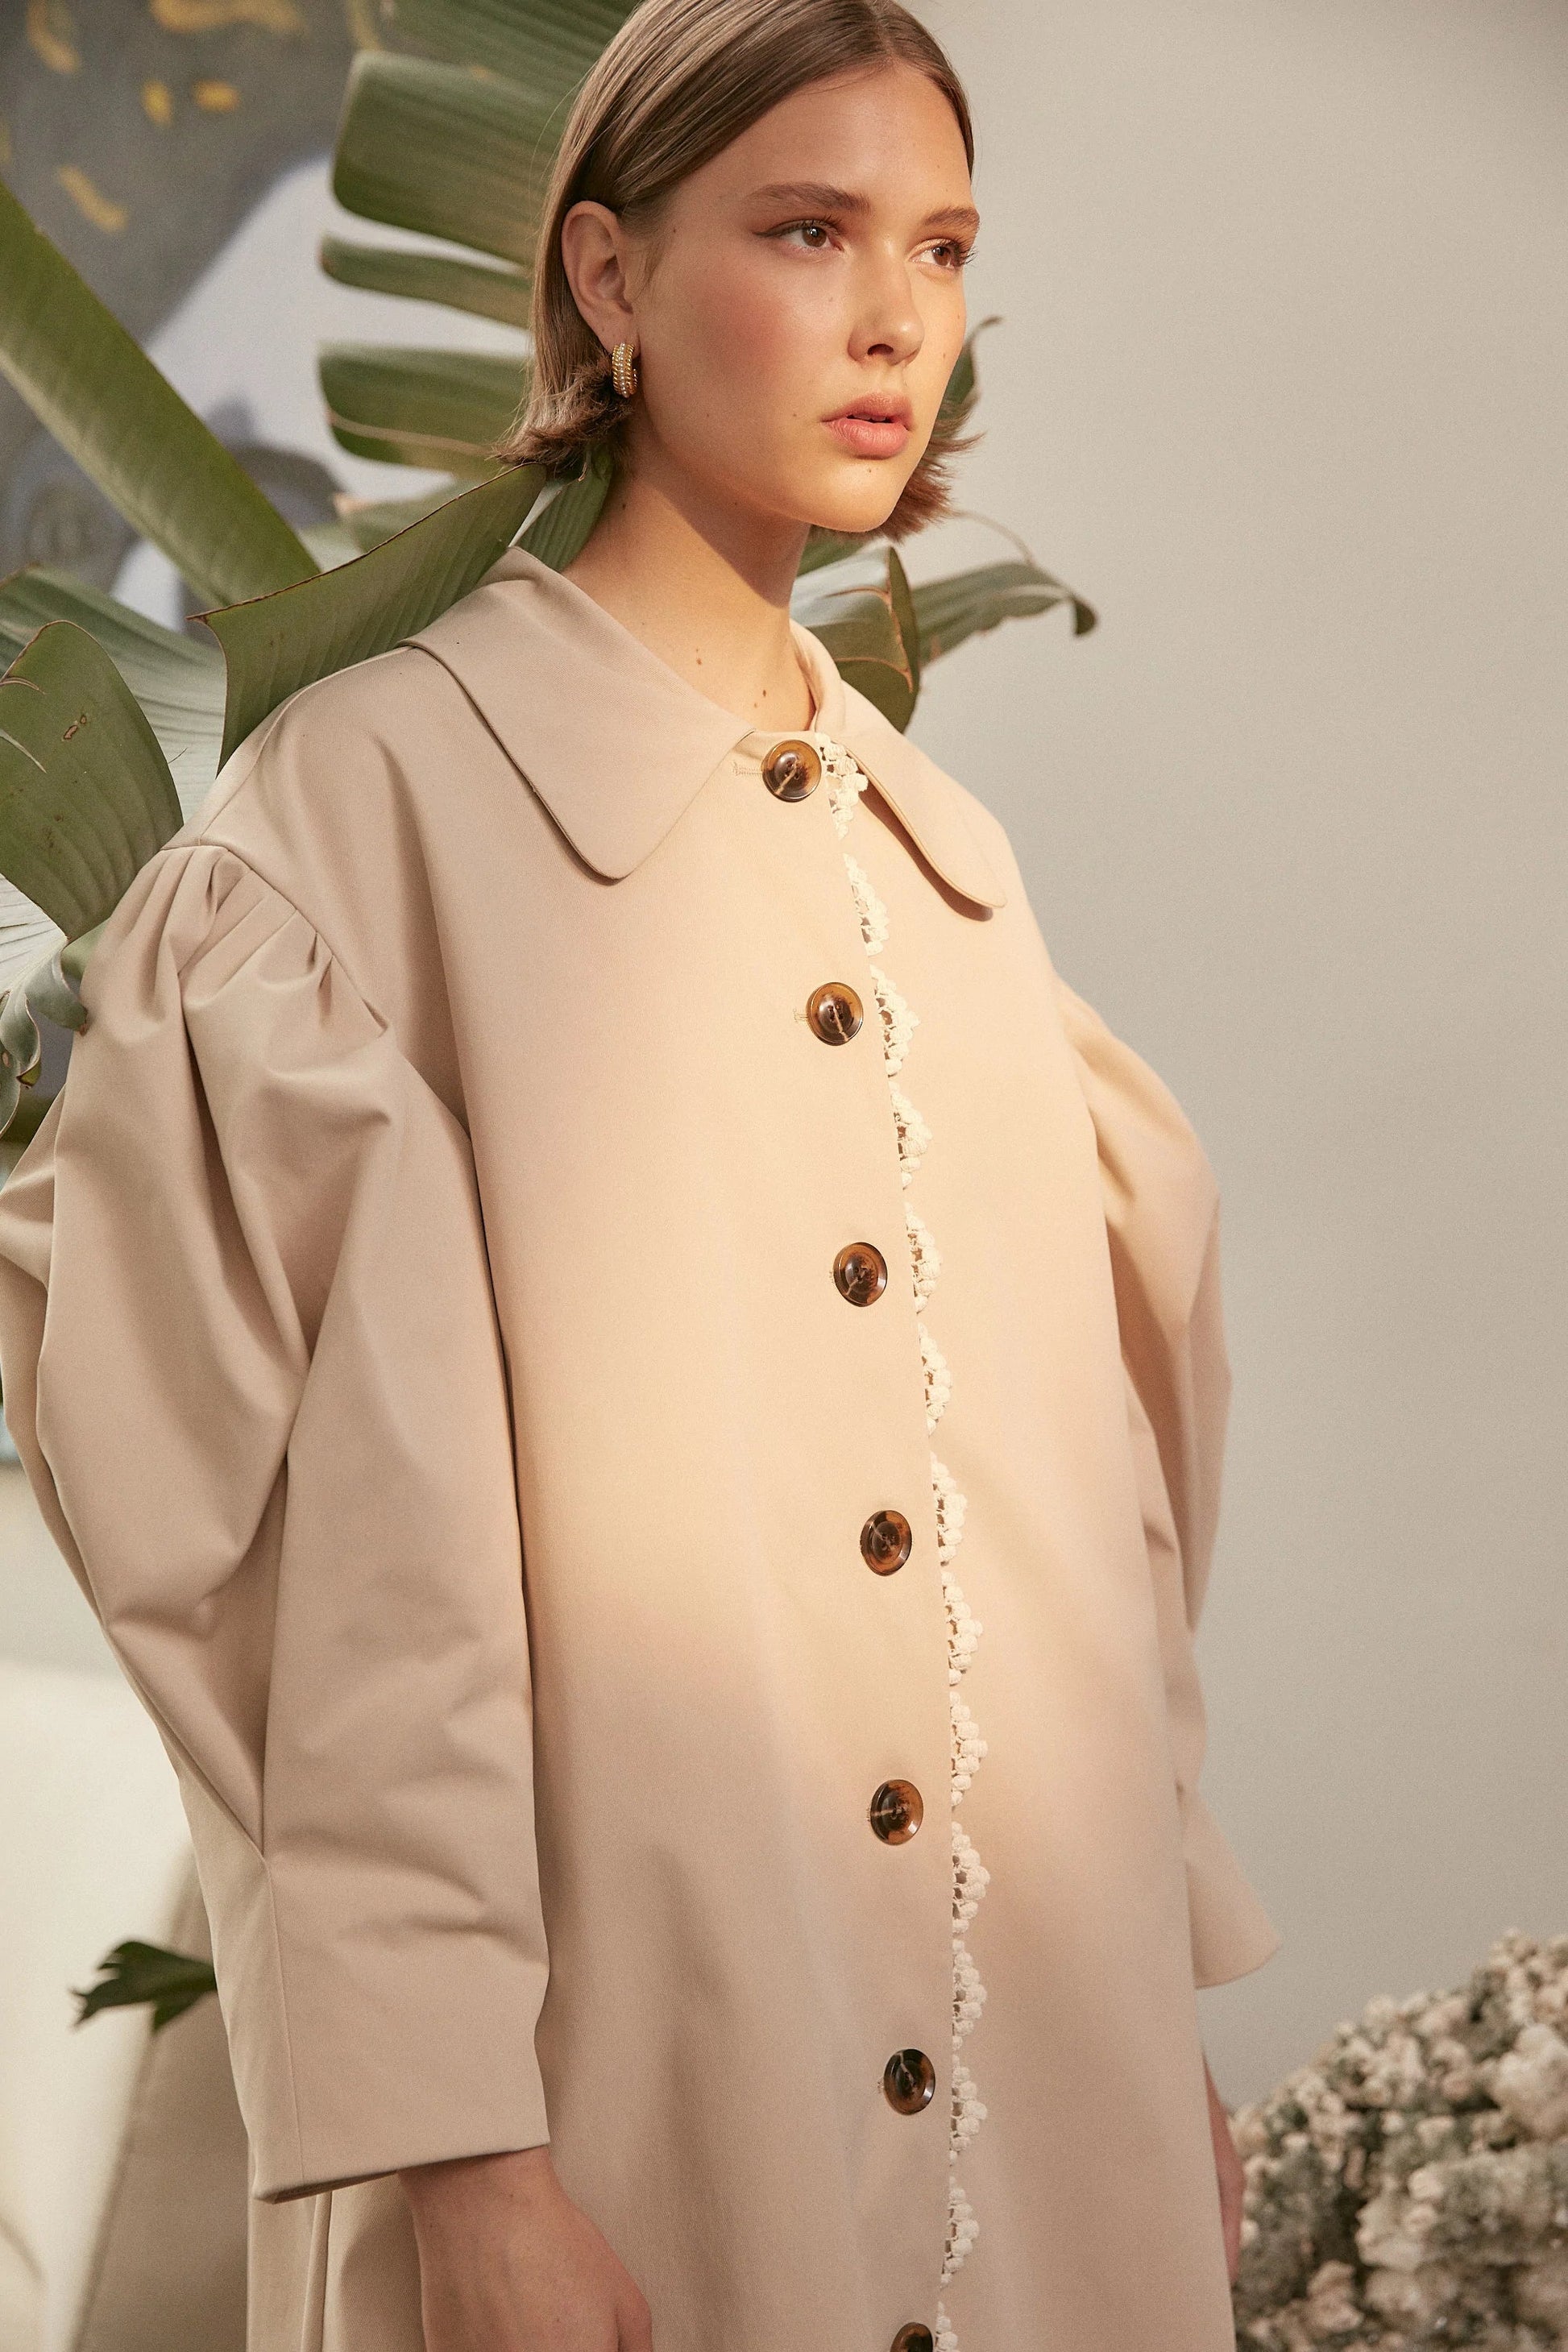 Jovonna Bloom Trench Coat-Fi&Co Boutique